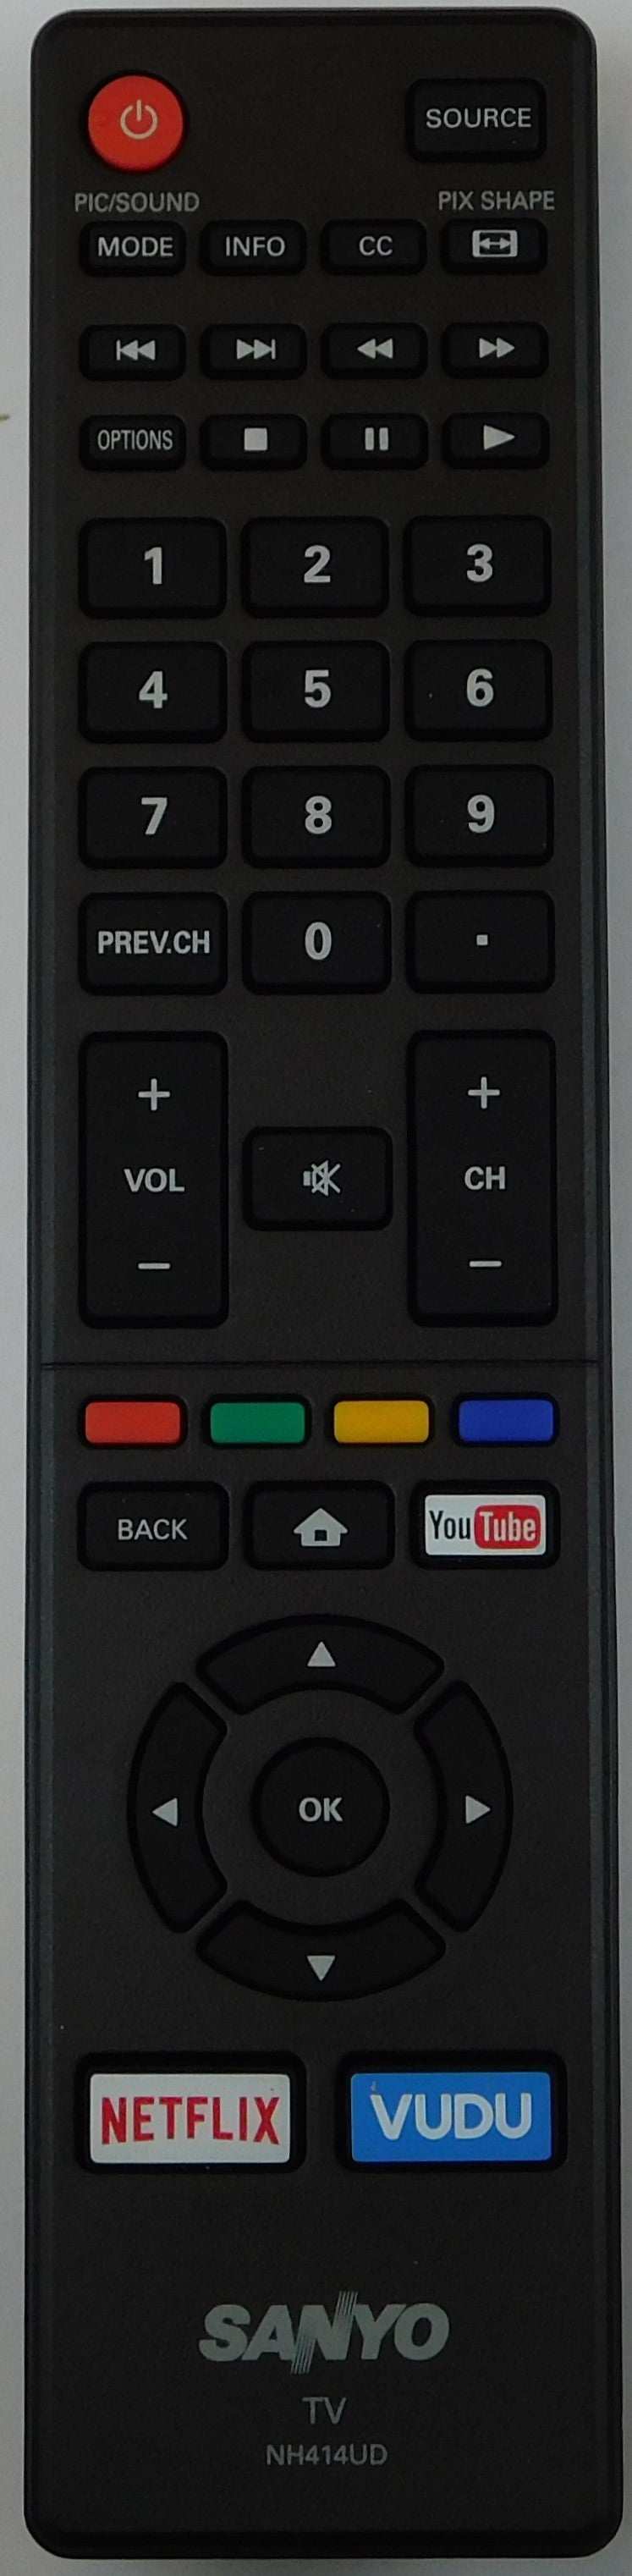 OEM replacement remote control for Sanyo LED/LCD TV NH414UD